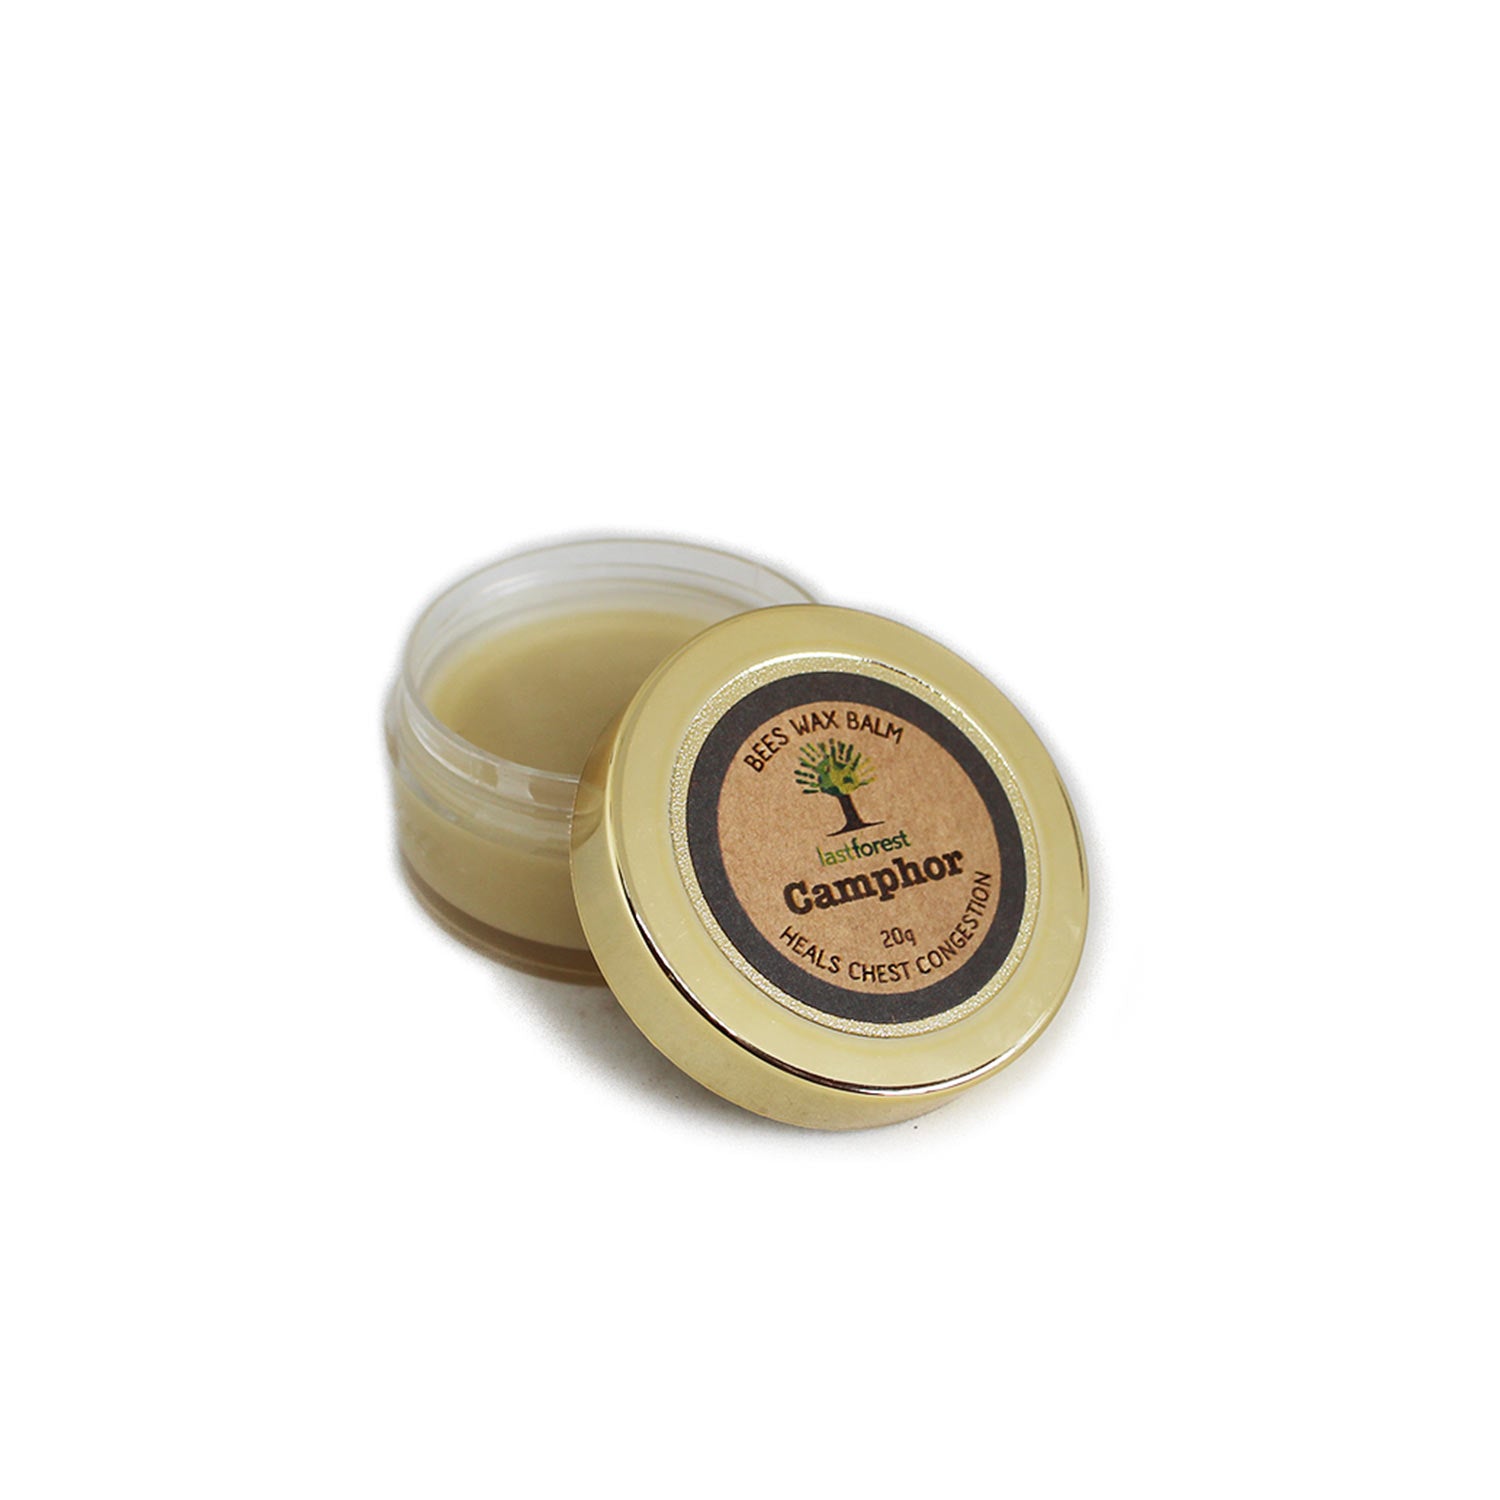 Last Forest Camphor Balm for relief from chest congestion, cold, allergies and sinus, 20g